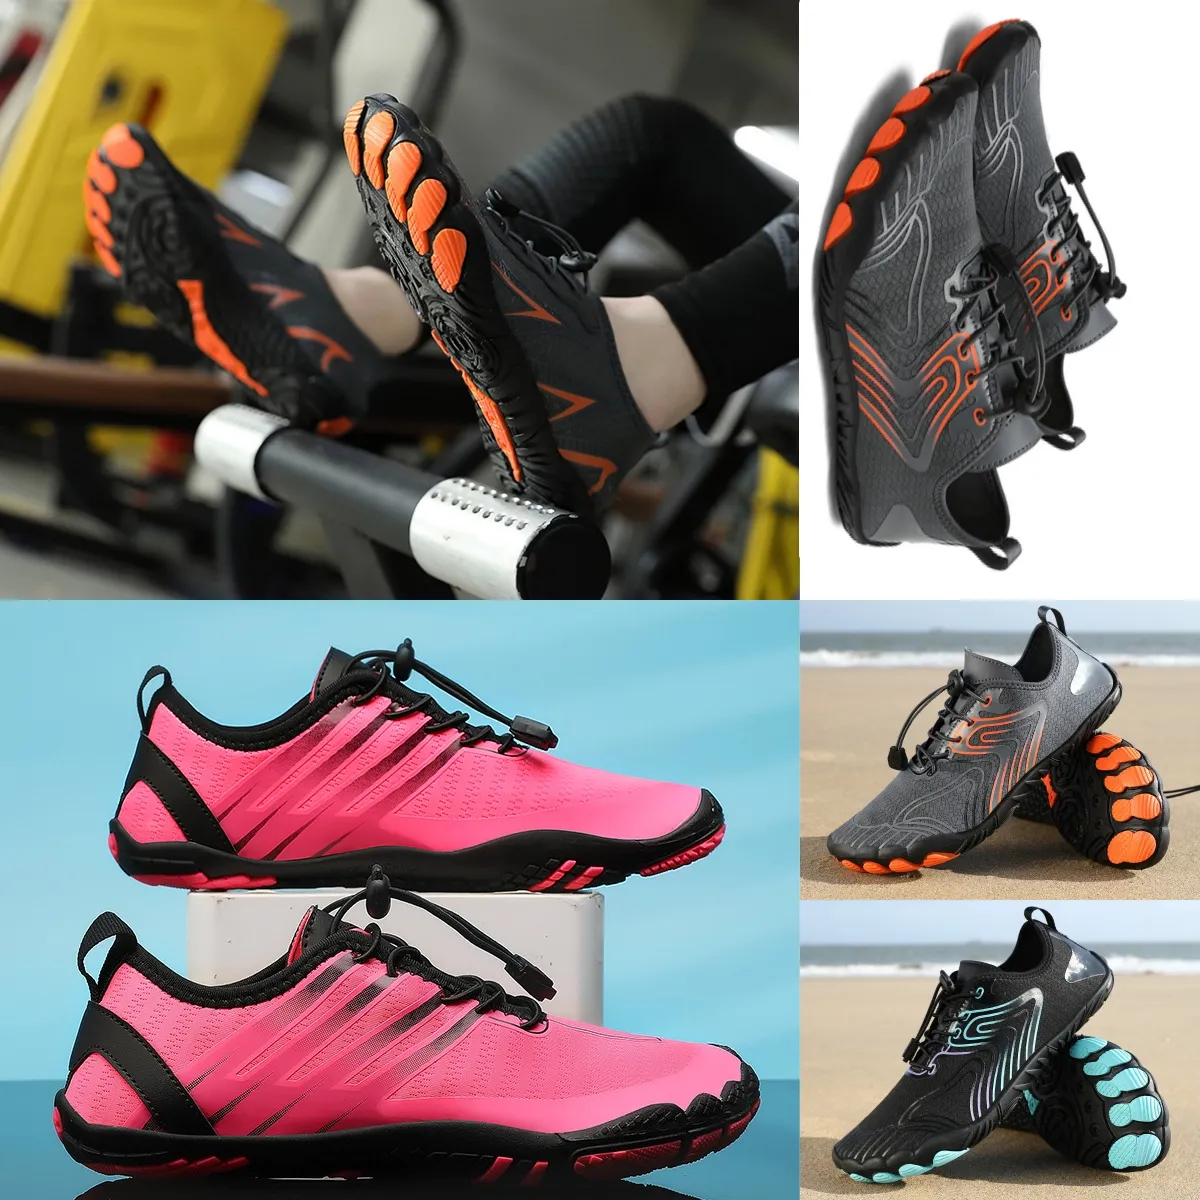 Hot quality Athletic Outdoor Swimming Shoes Beach Aqua Shoes Girls Quick Dry Barefoot Upstream Surfing Slippers Hiking Water Shoes Wading Unisex Sneakers